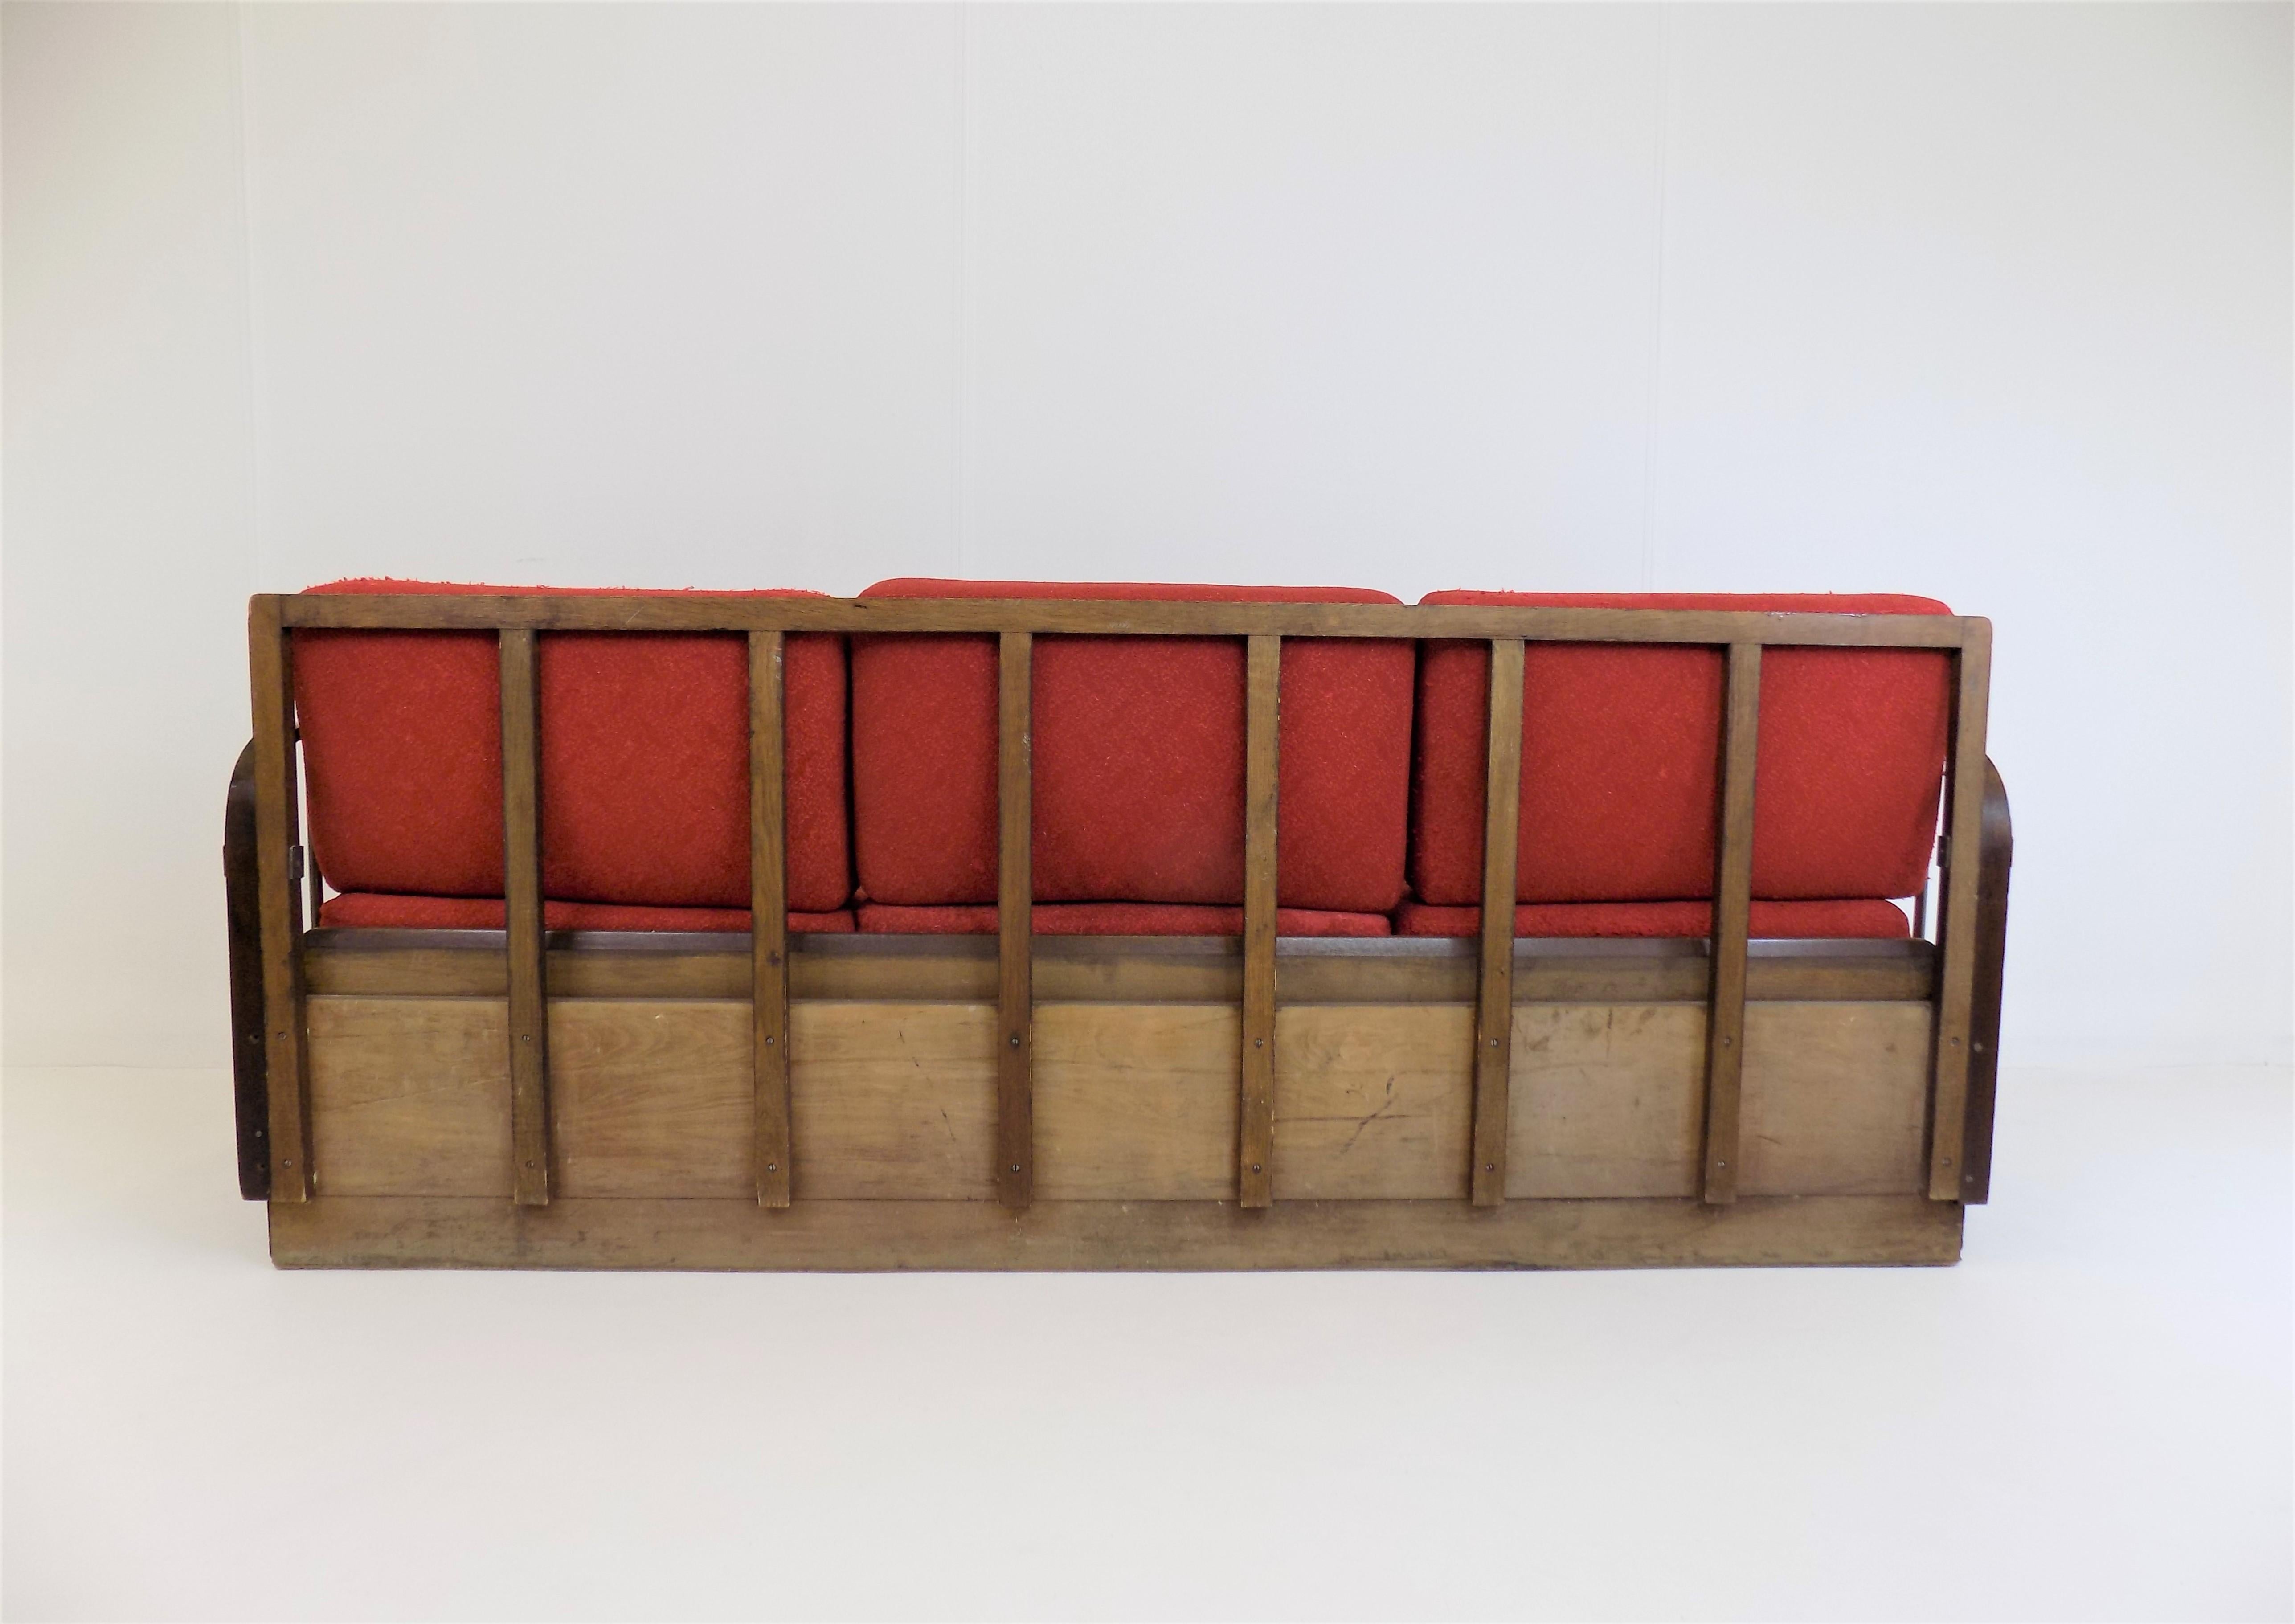 Halabala H-215 Bauhaus Sofa for UP Zavody In Good Condition For Sale In Ludwigslust, DE